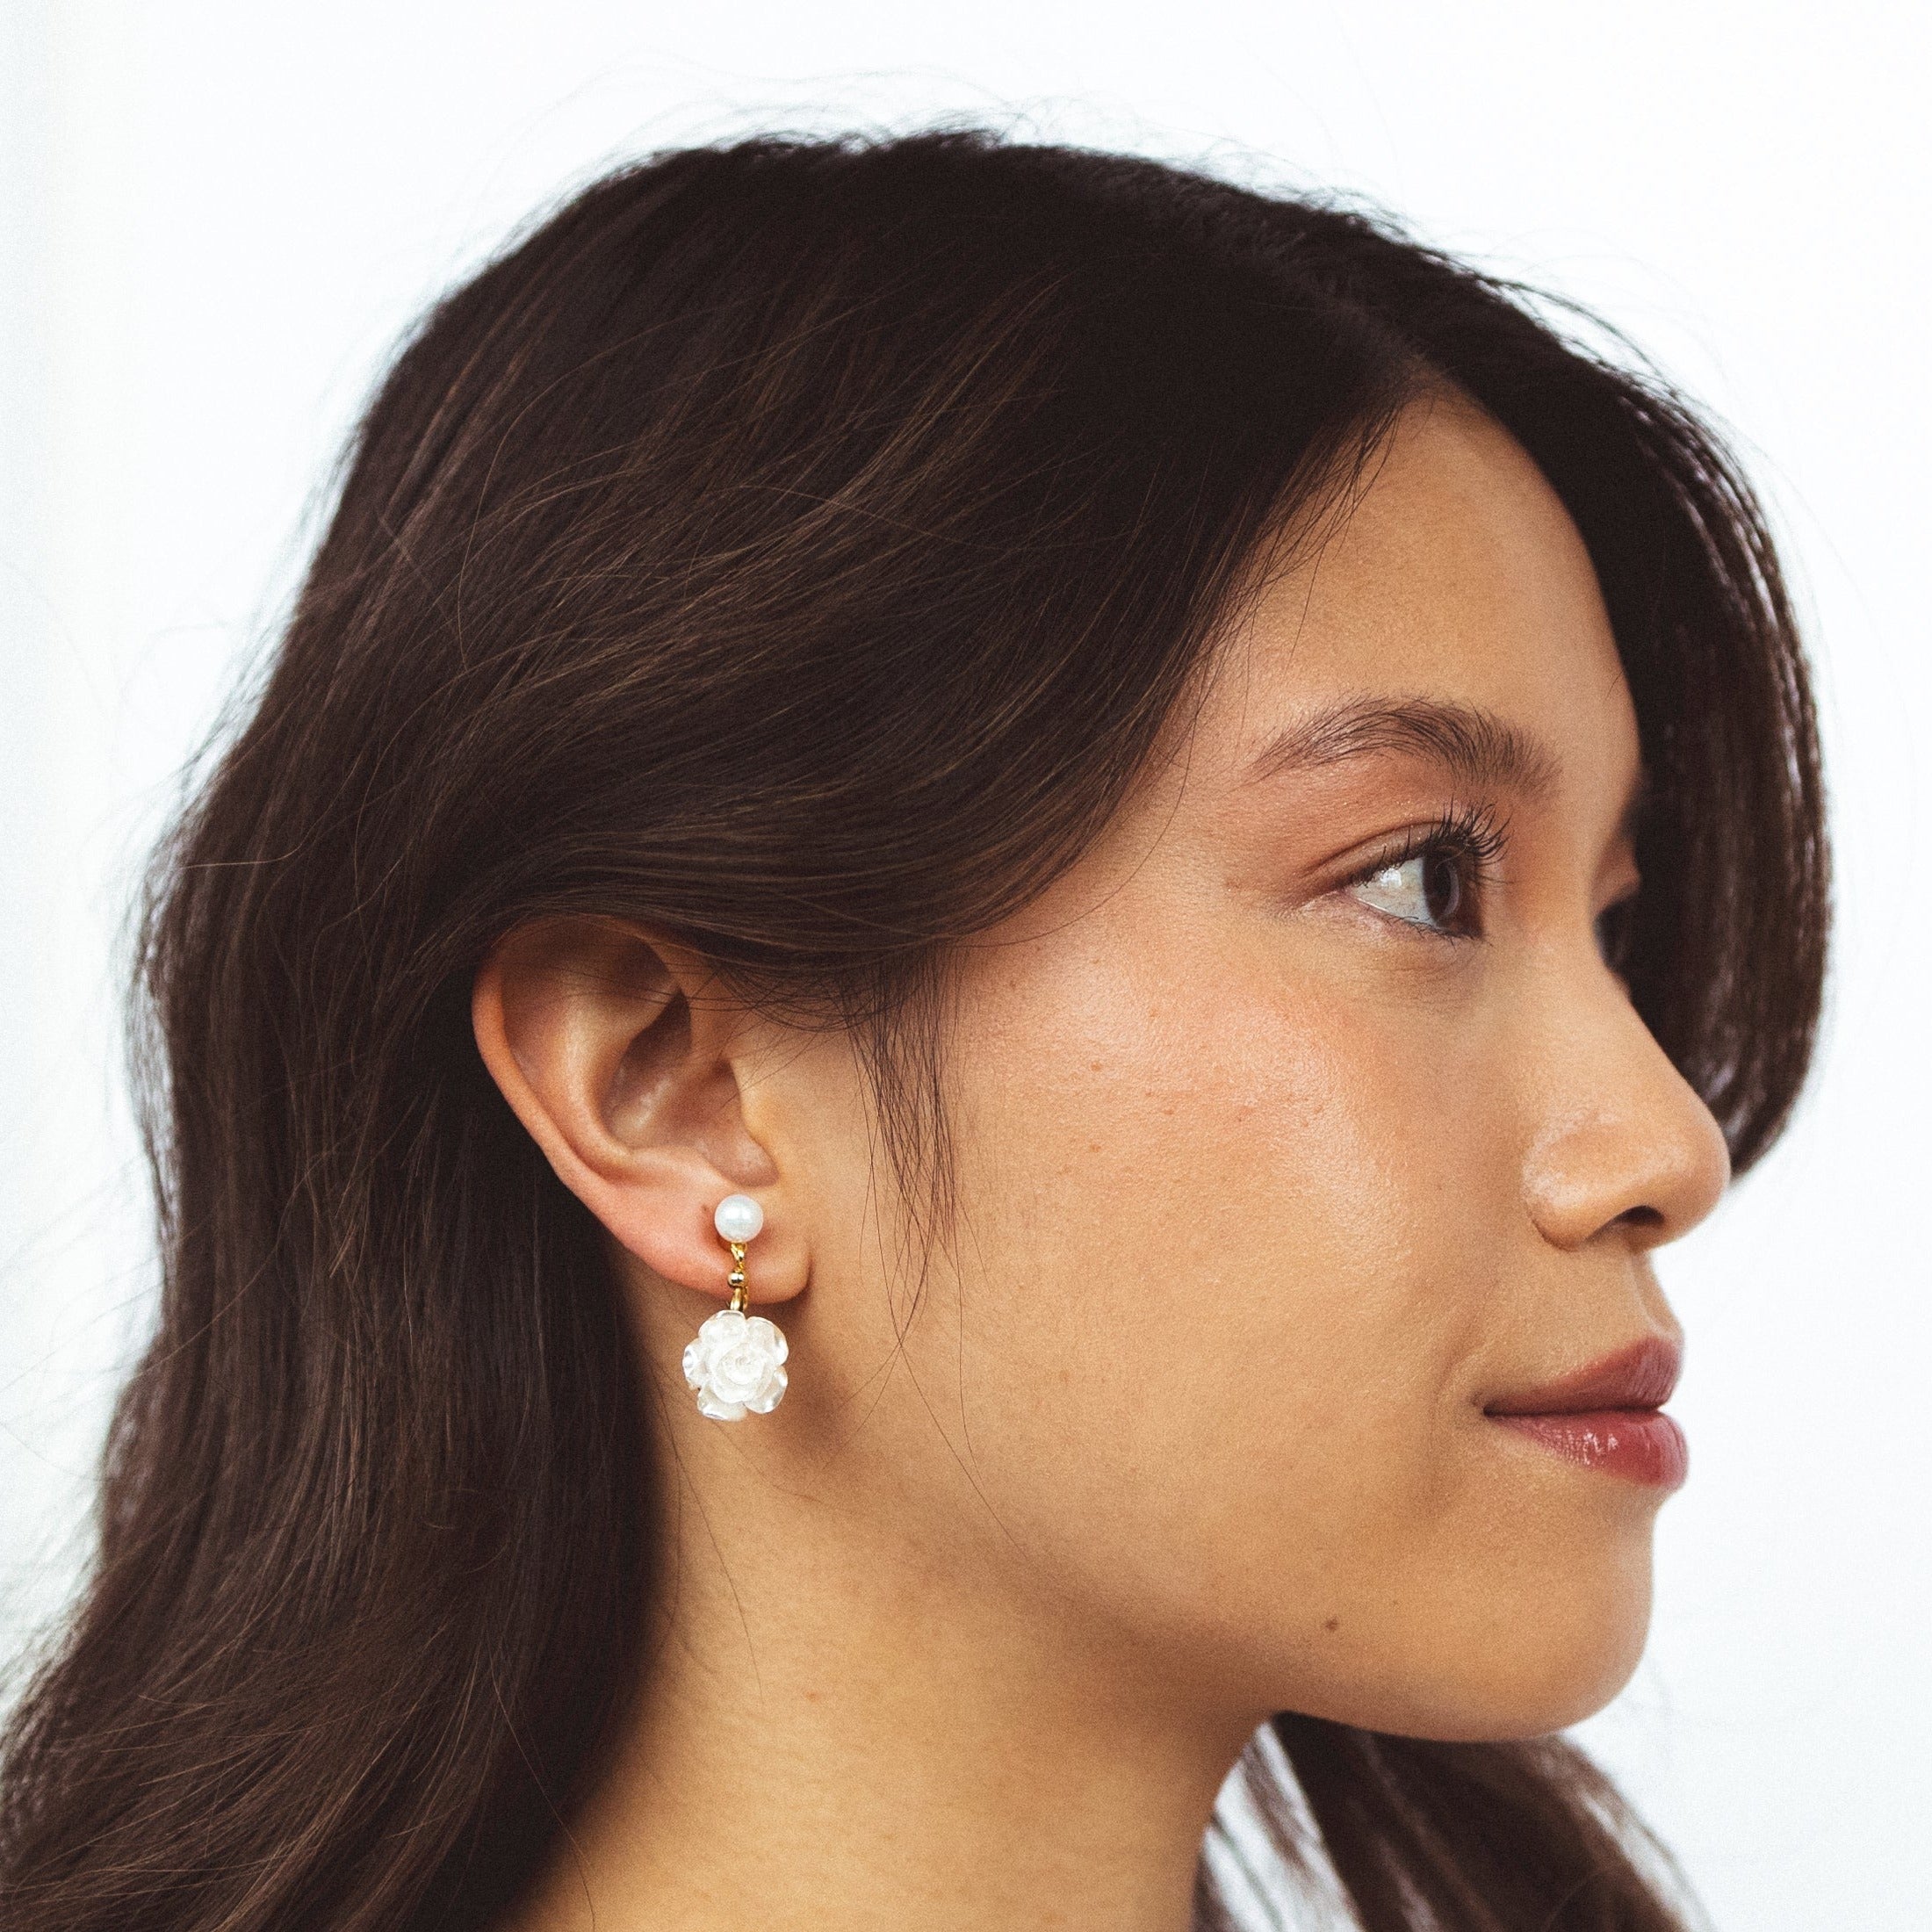 A model wearing the Rosemary Clip On Earrings. These earrings provide a secure hold for up to 24 hours and are easily adjustable for all ear types. Elevate your style without sacrificing comfort with these must-have accessories.